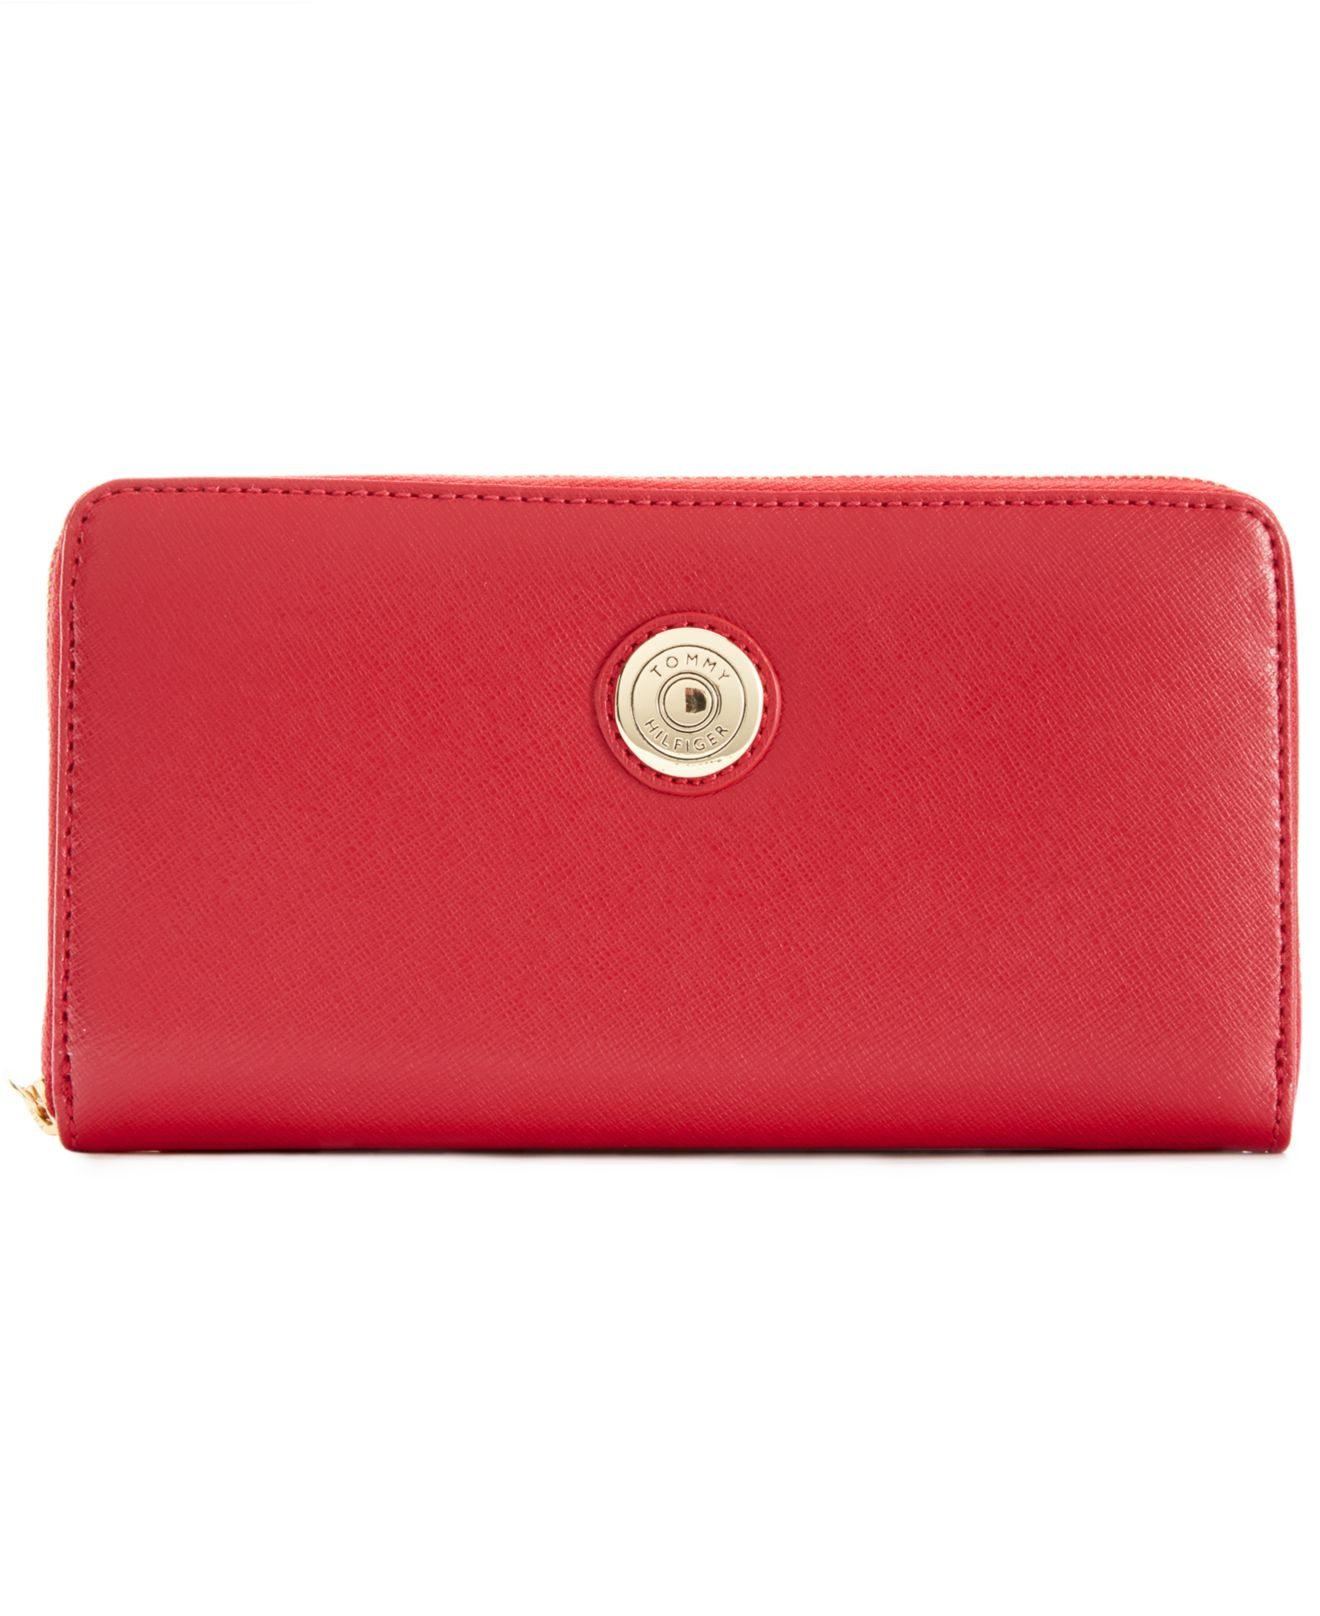 Lyst - Tommy Hilfiger Th Signature Coin Large Zip Wallet in Red